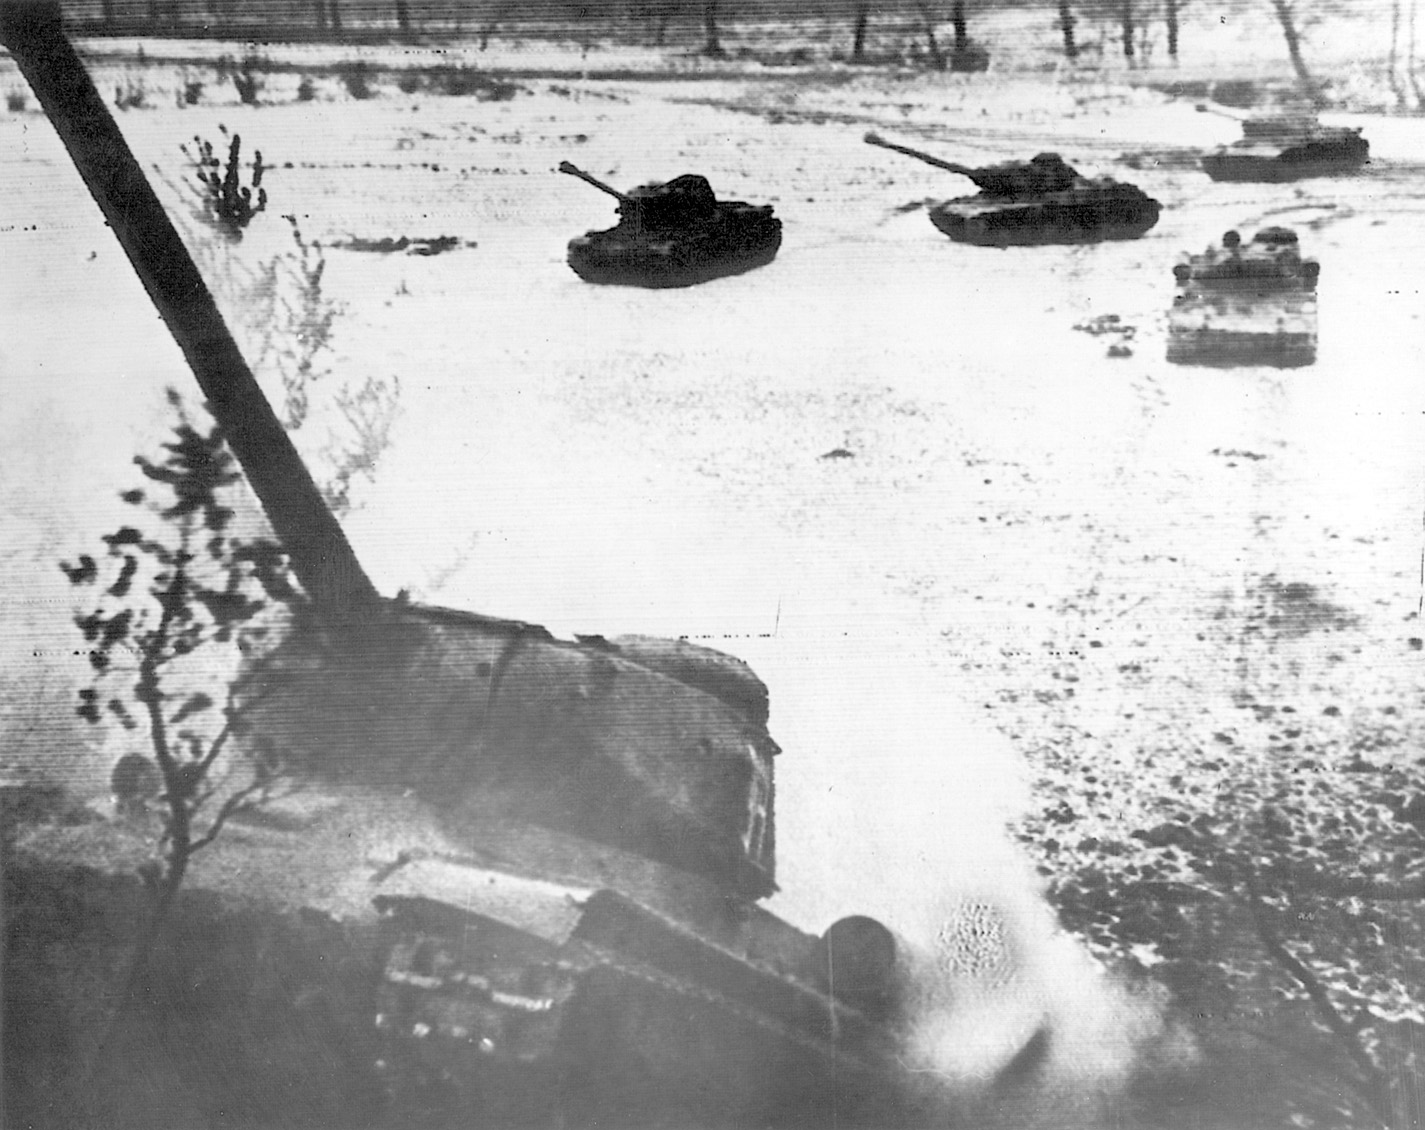 ABOVE: Heavy tanks of the Red Army advance across a snow-covered valley and up a hill in East Prussia on February 17, 1945. Within weeks, Soviet armor was in the streets of Berlin.